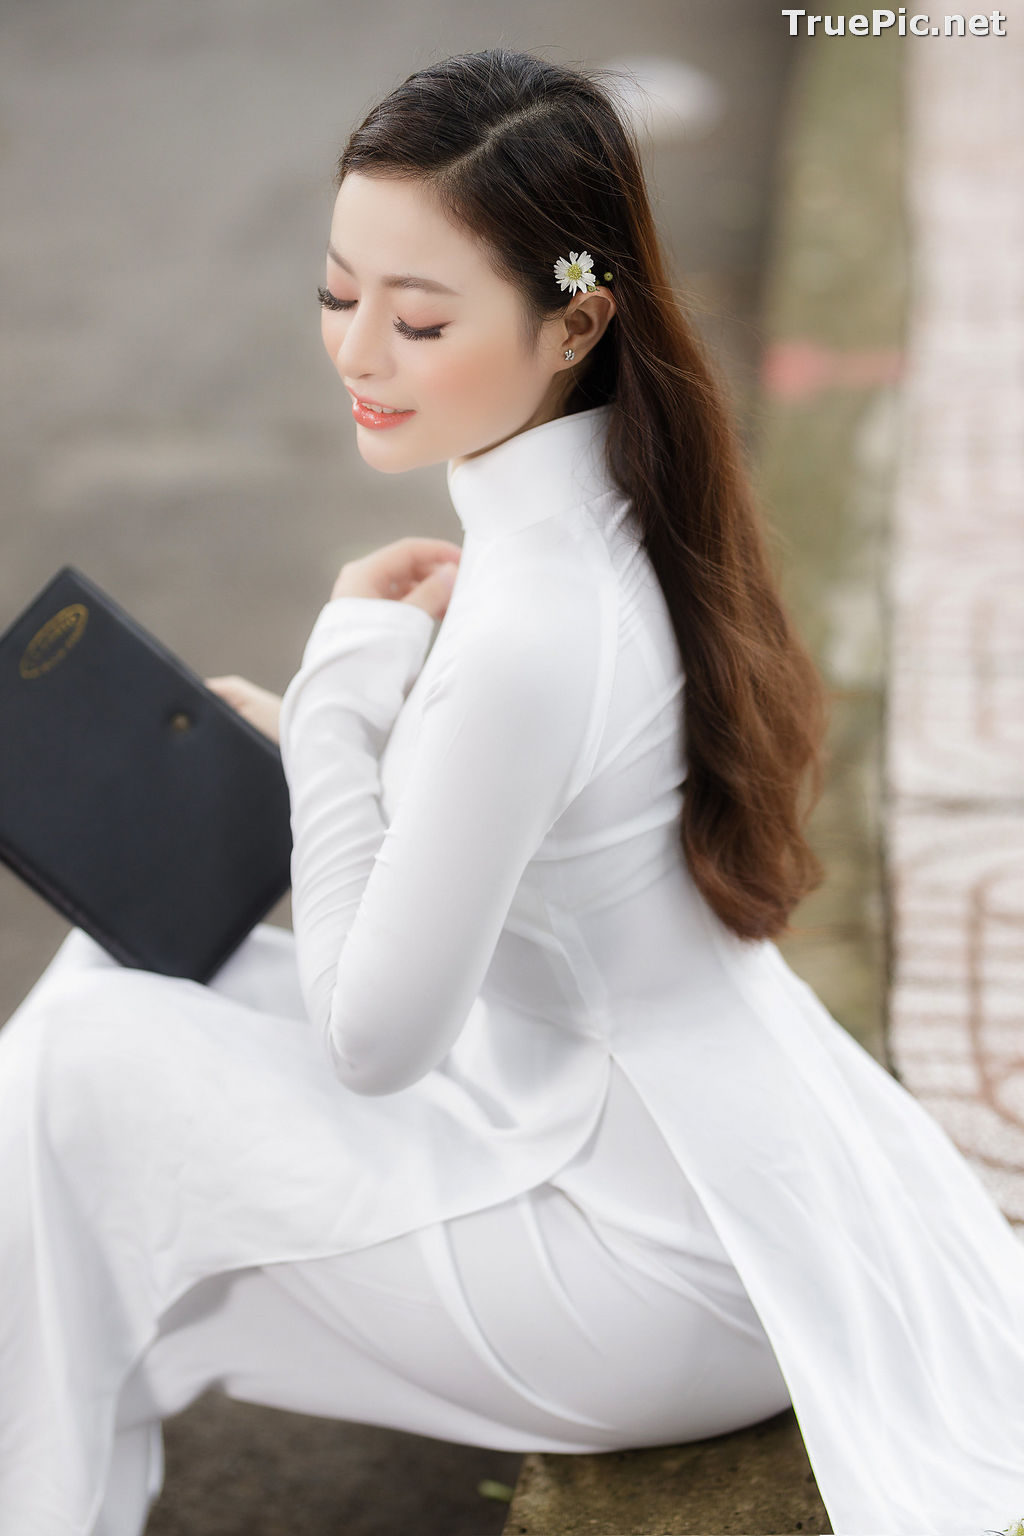 Image The Beauty of Vietnamese Girls with Traditional Dress (Ao Dai) #1 - TruePic.net - Picture-58